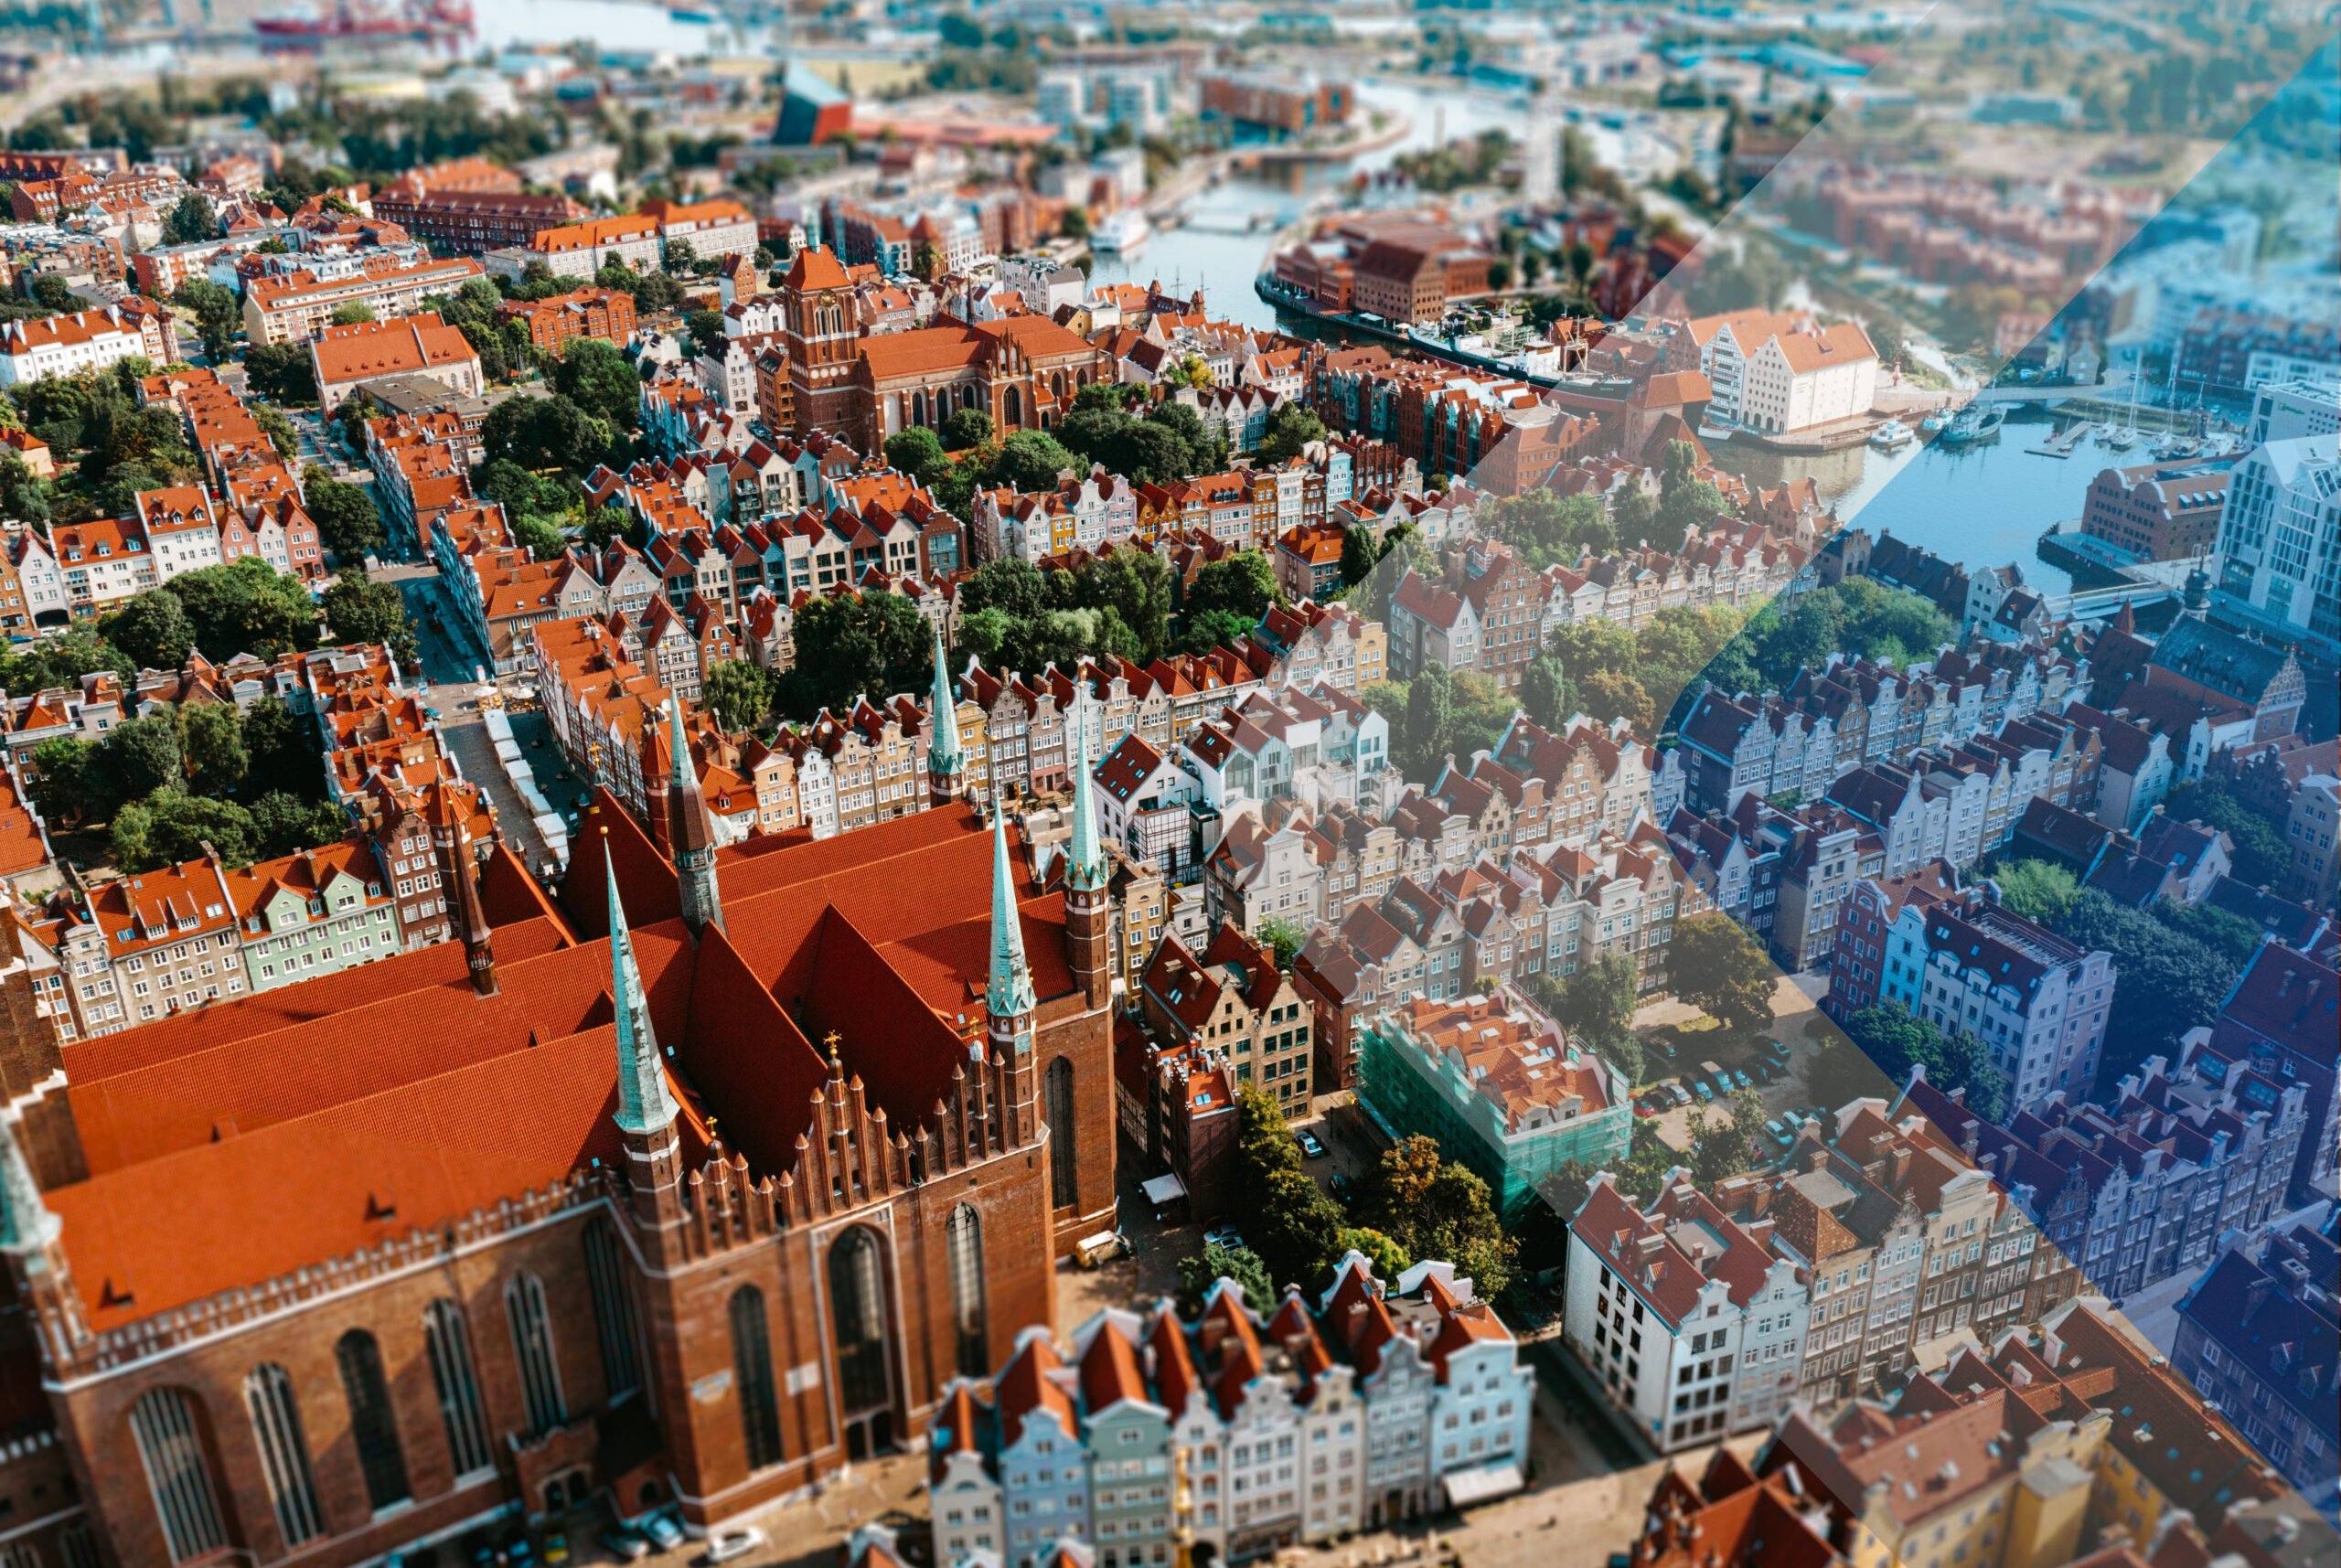 Stock photo of Wroclaw to accompany article on employer of record in Poland EOR